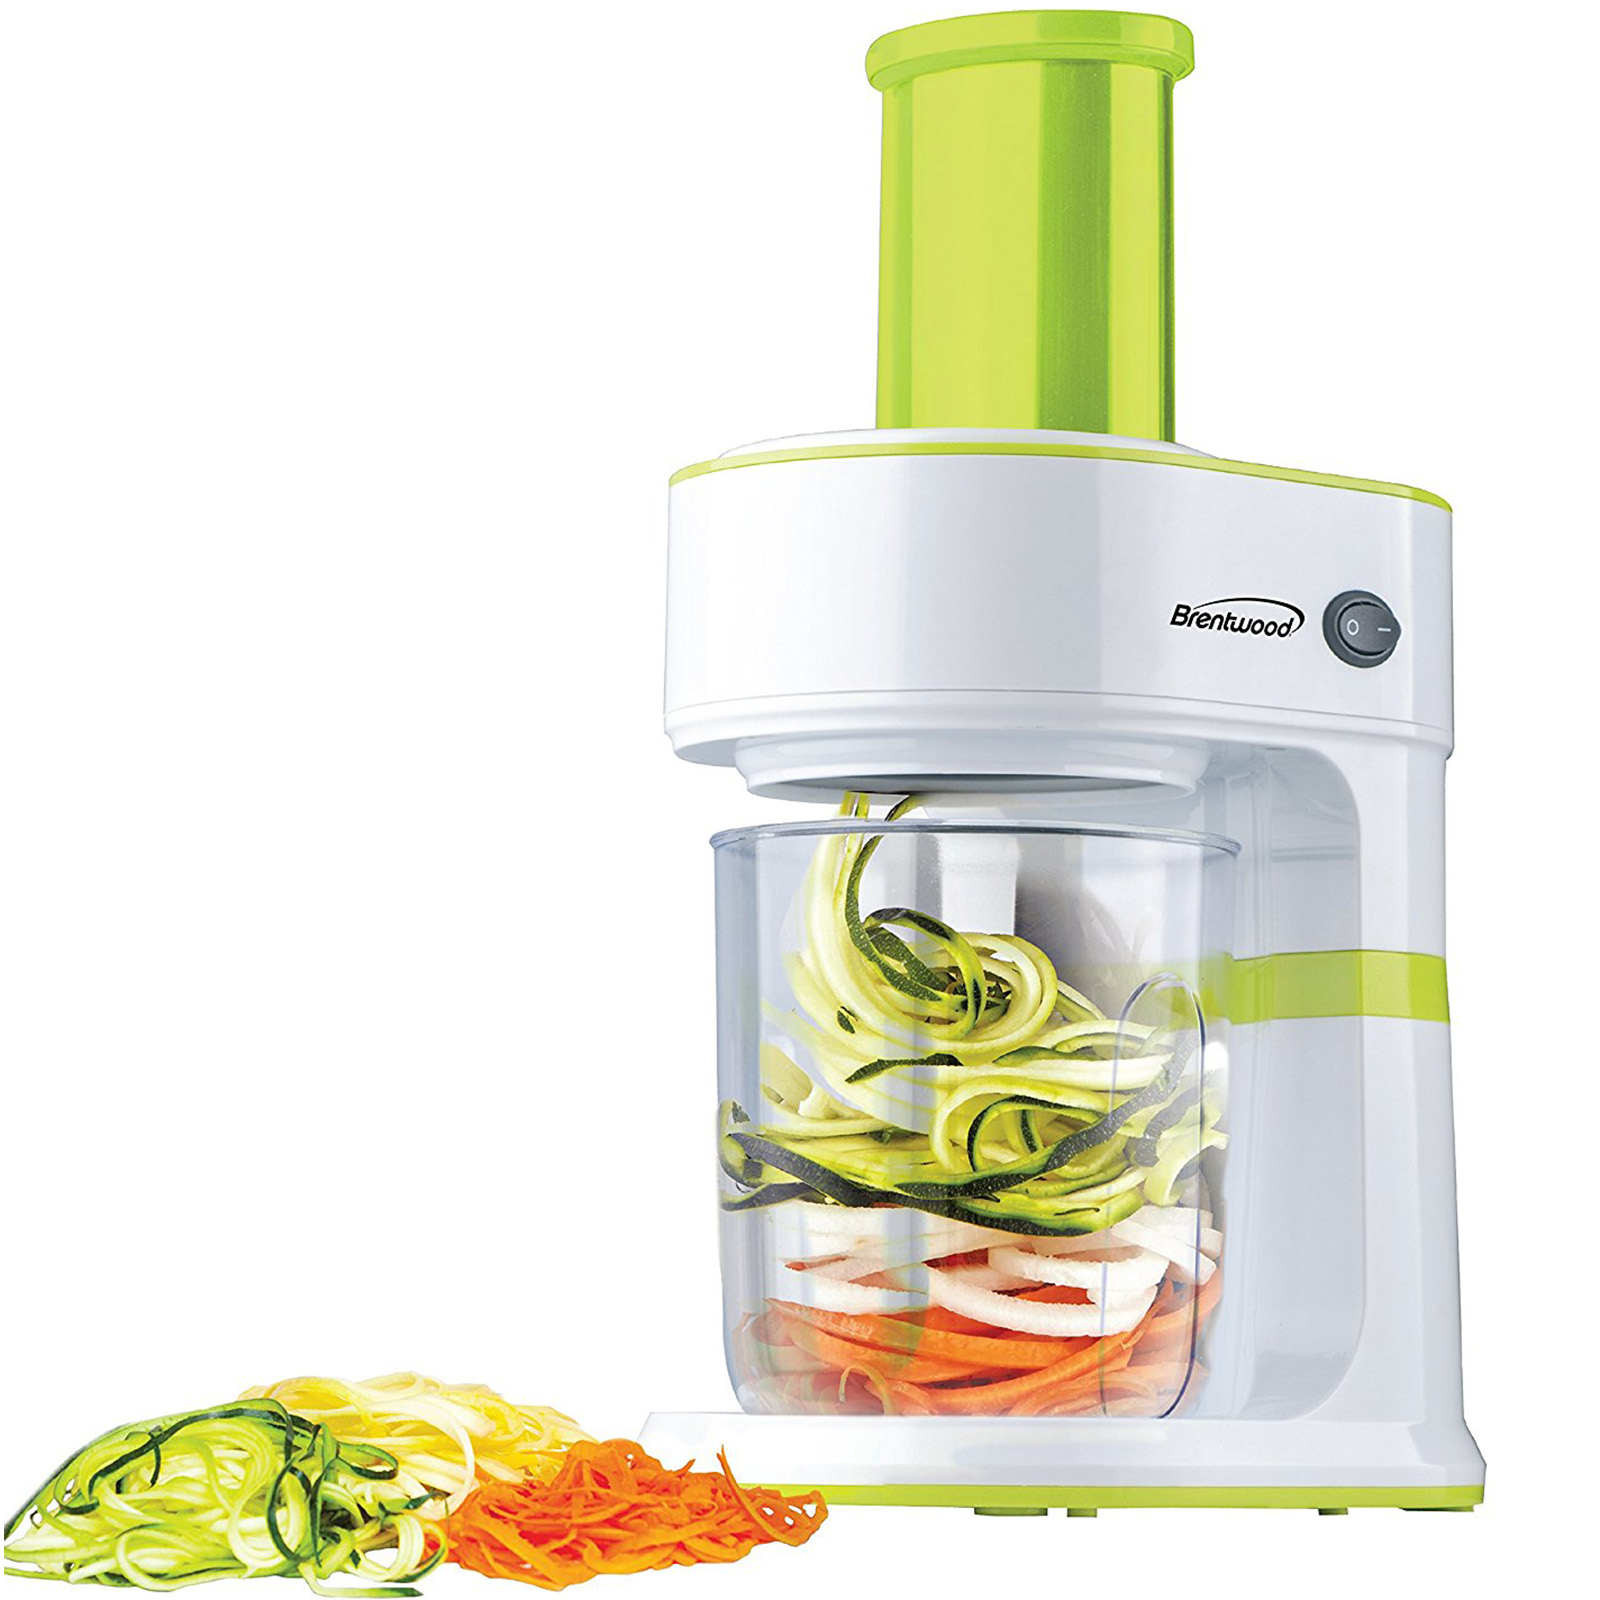 Brentwood 5-Cup Electric Vegetable Spiralizer and Slicer, Green